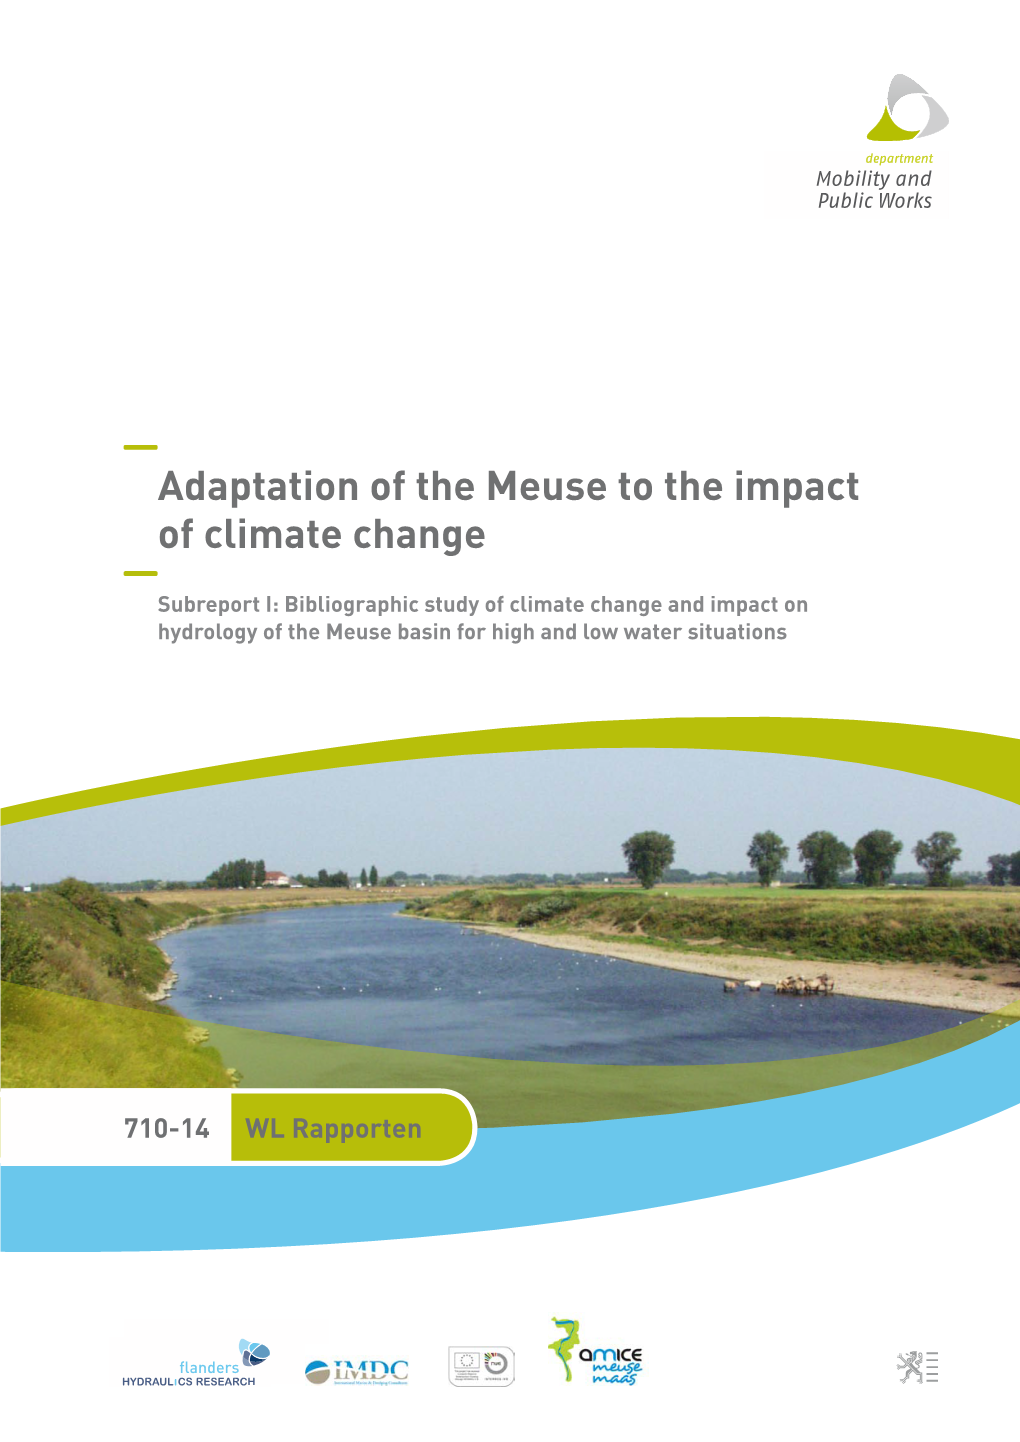 Adaptation of the Meuse to the Impact of Climate Change